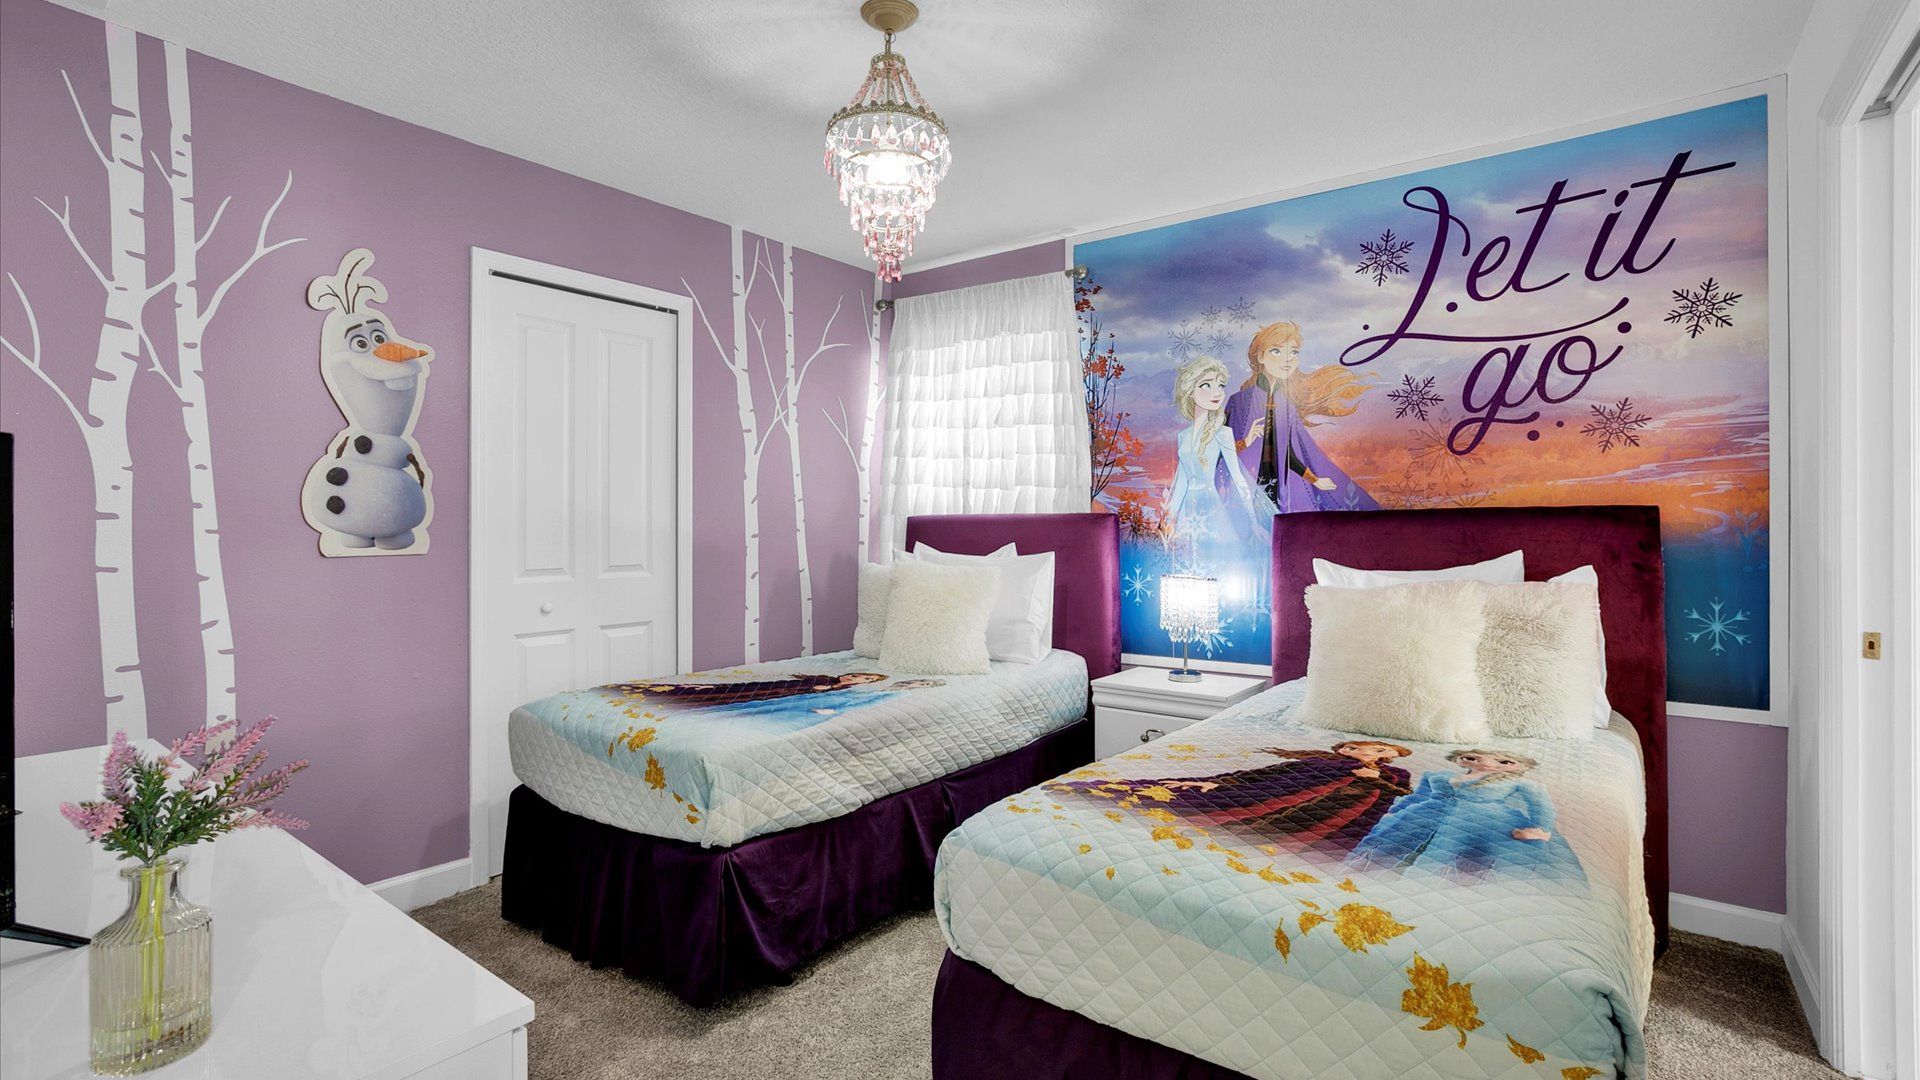 Two Twins Bedroom 4 Upstairs
Shared Bathroom
Frozen Theme